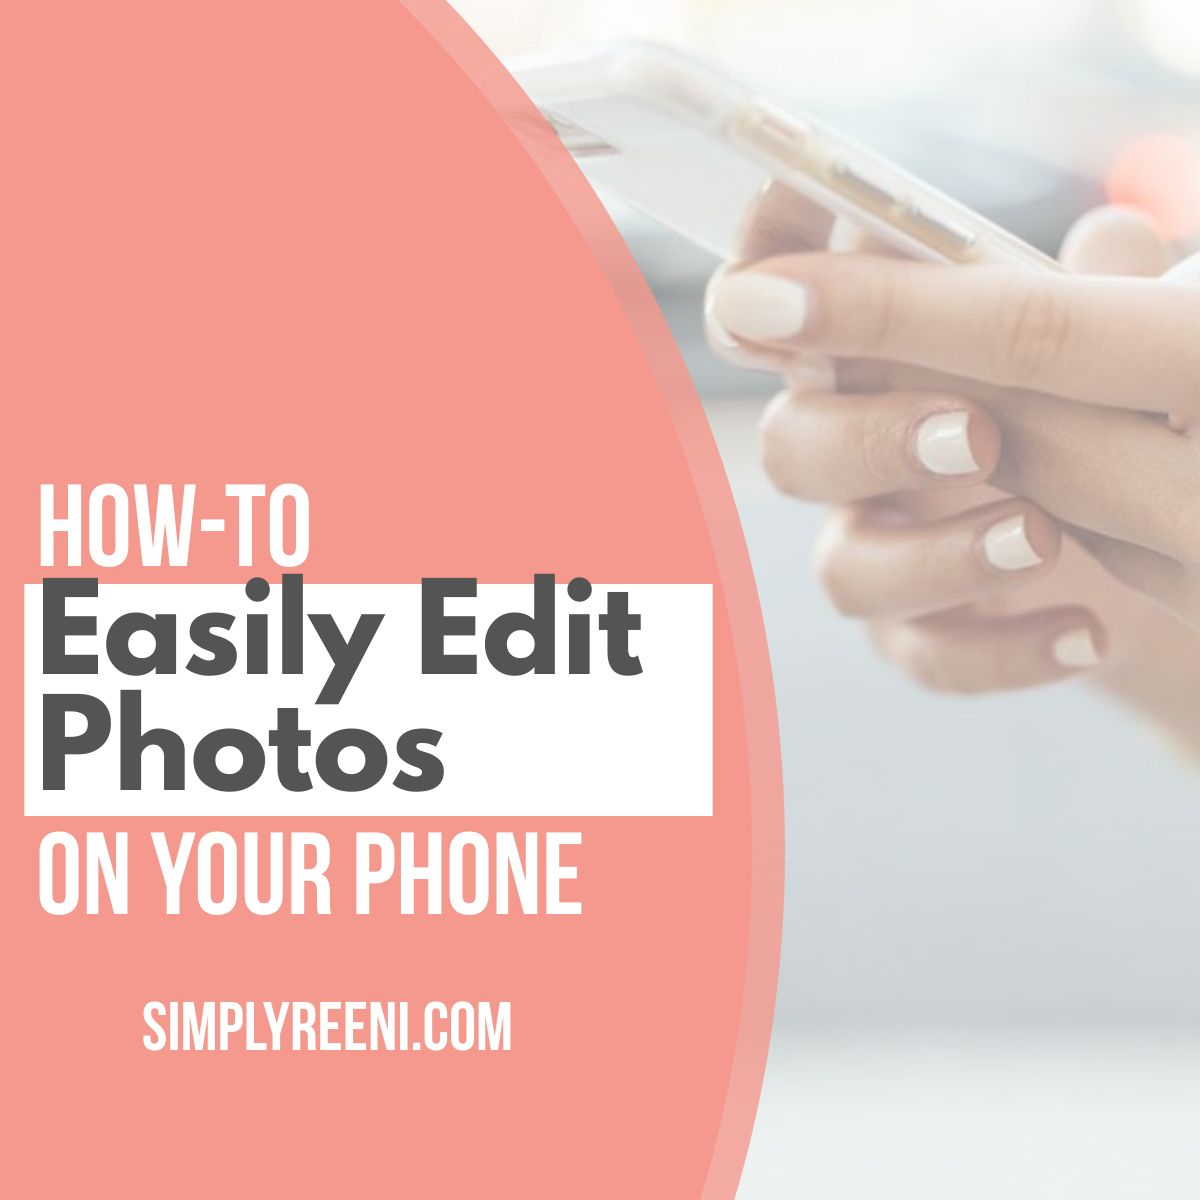 How-to Easily Edit Photos On Your Phone